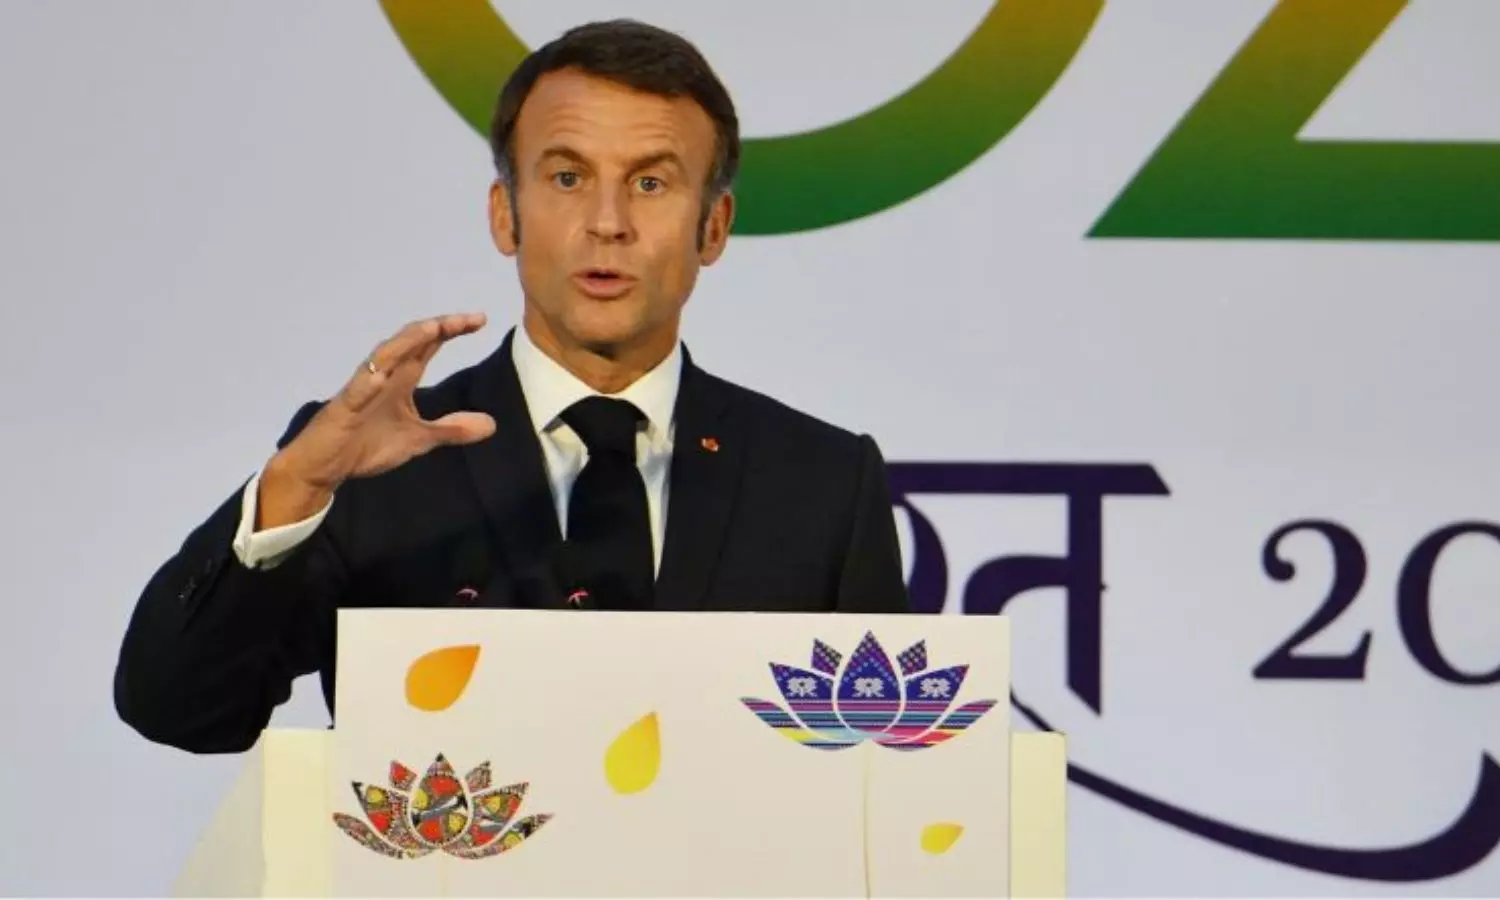 G20 Confirms Russias Isolation, Says Macron, Thanks PM For Words Of Peace